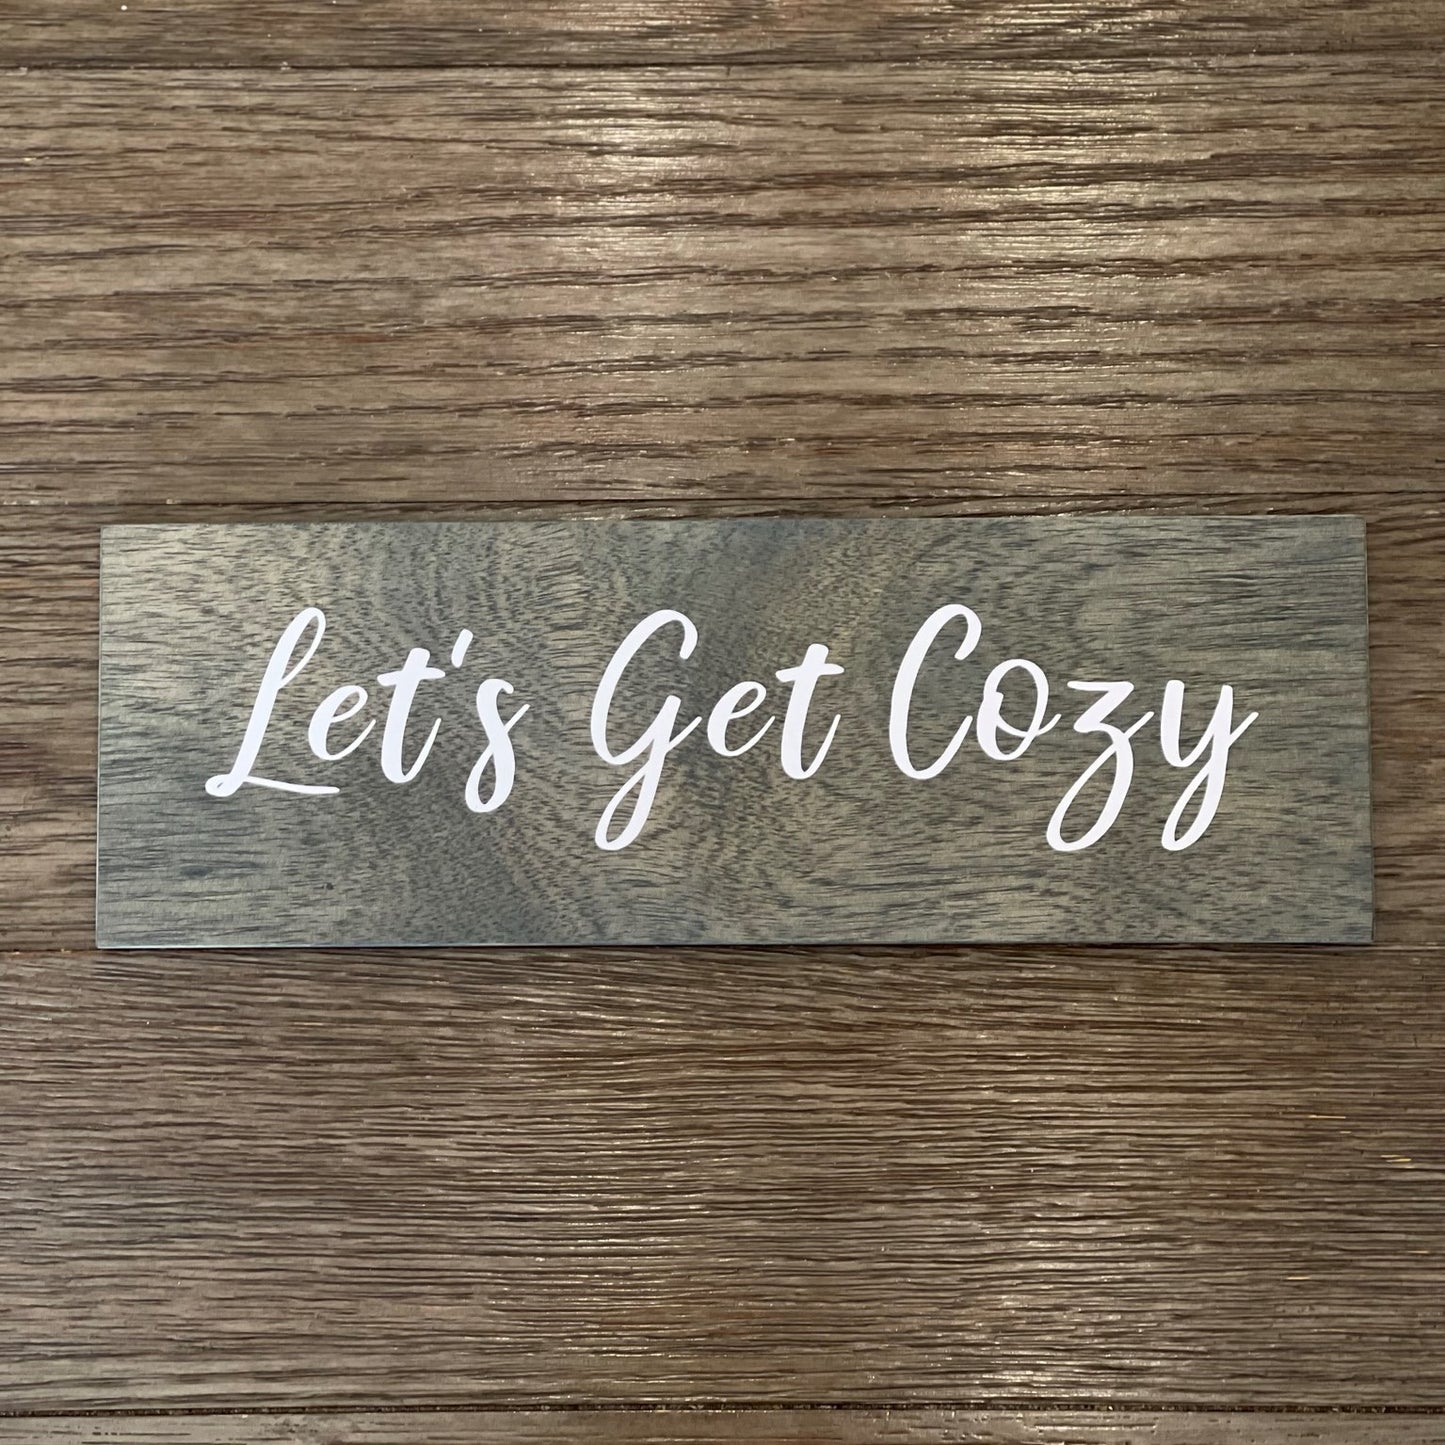 Let's Get Cozy - Funny Sign - Wall Decor - Bar Wall Art - Wooden Sign